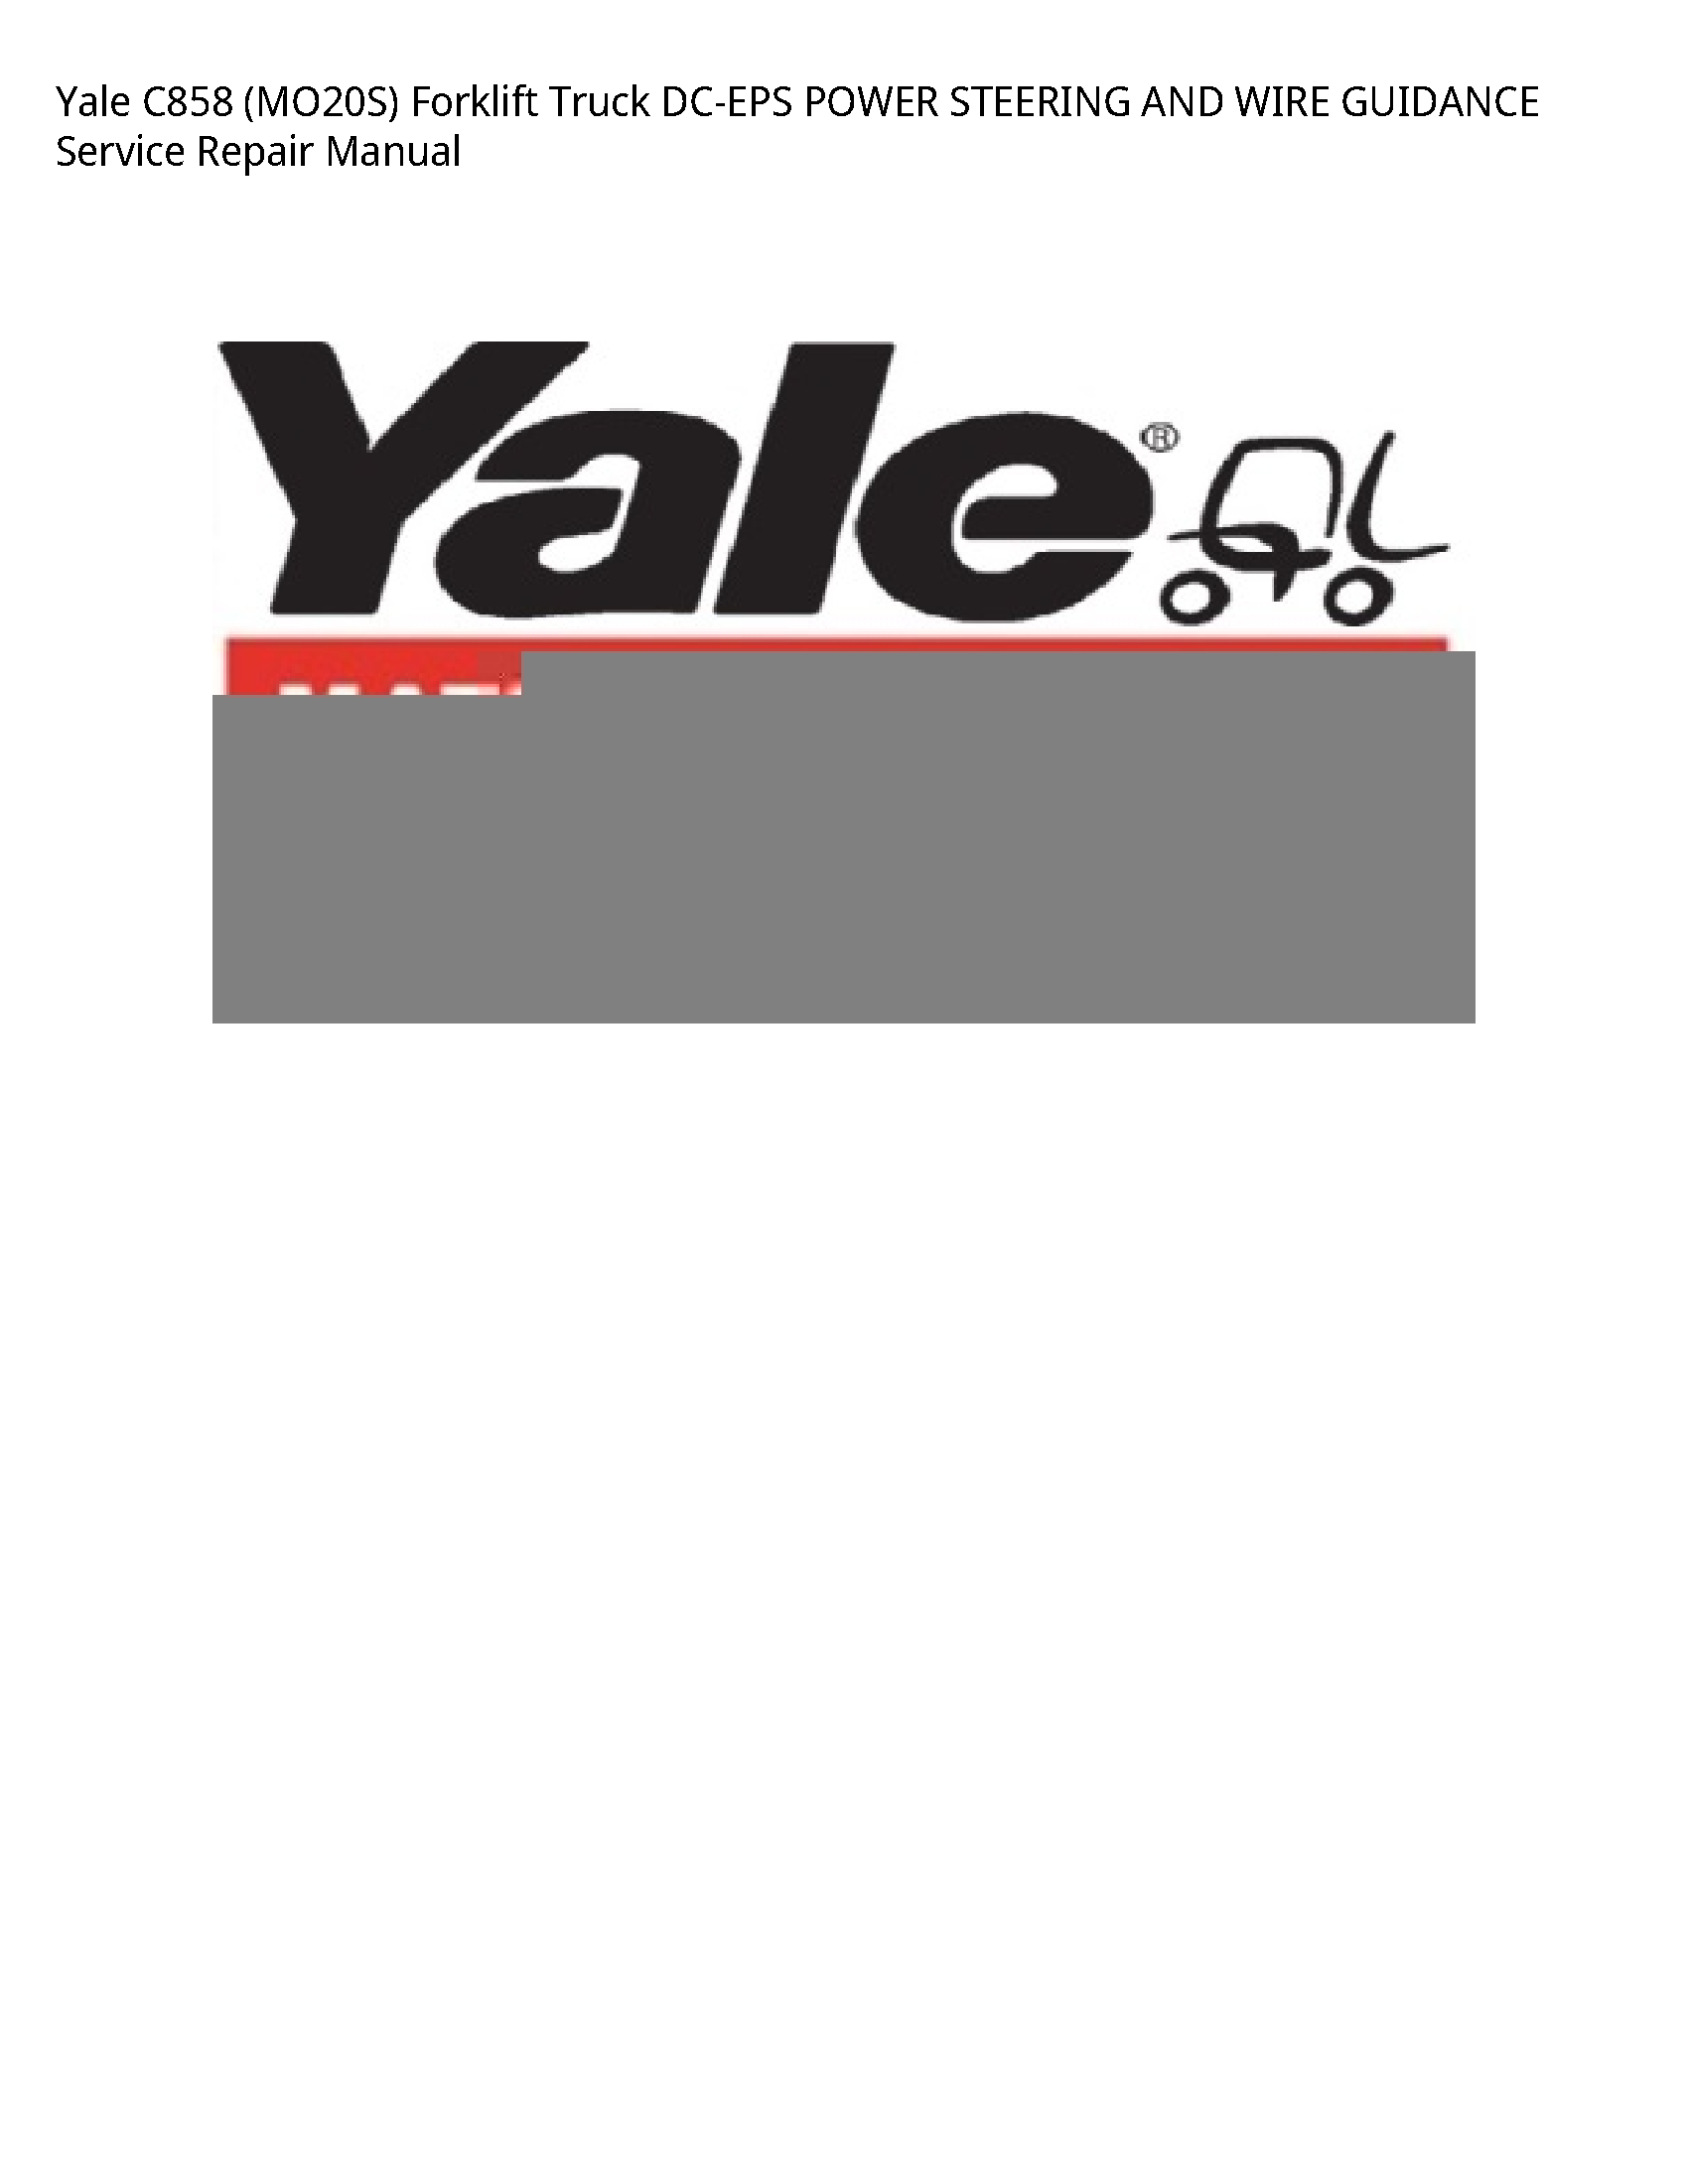 Yale C858 Forklift Truck DC-EPS POWER STEERING AND WIRE GUIDANCE manual